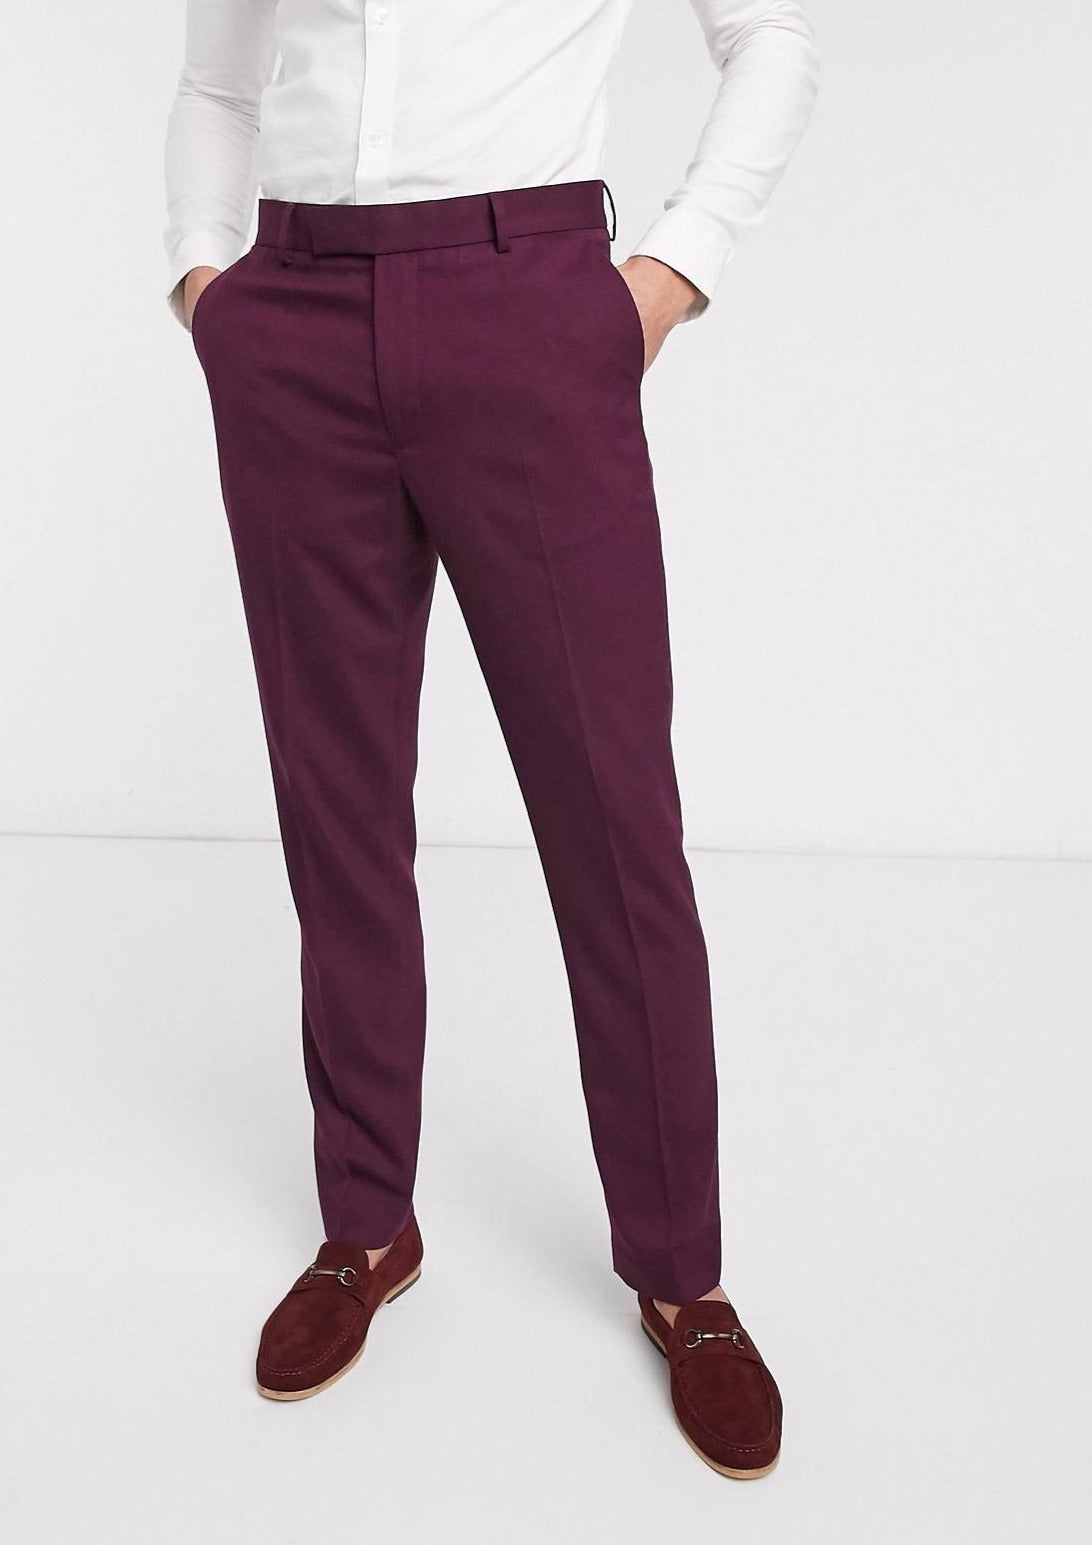 Buy Boy's Burgundy Slim Fit Dress Pants Perfect for Weddings, Parties,  Everyday, and Other Milestones Online in India - Etsy